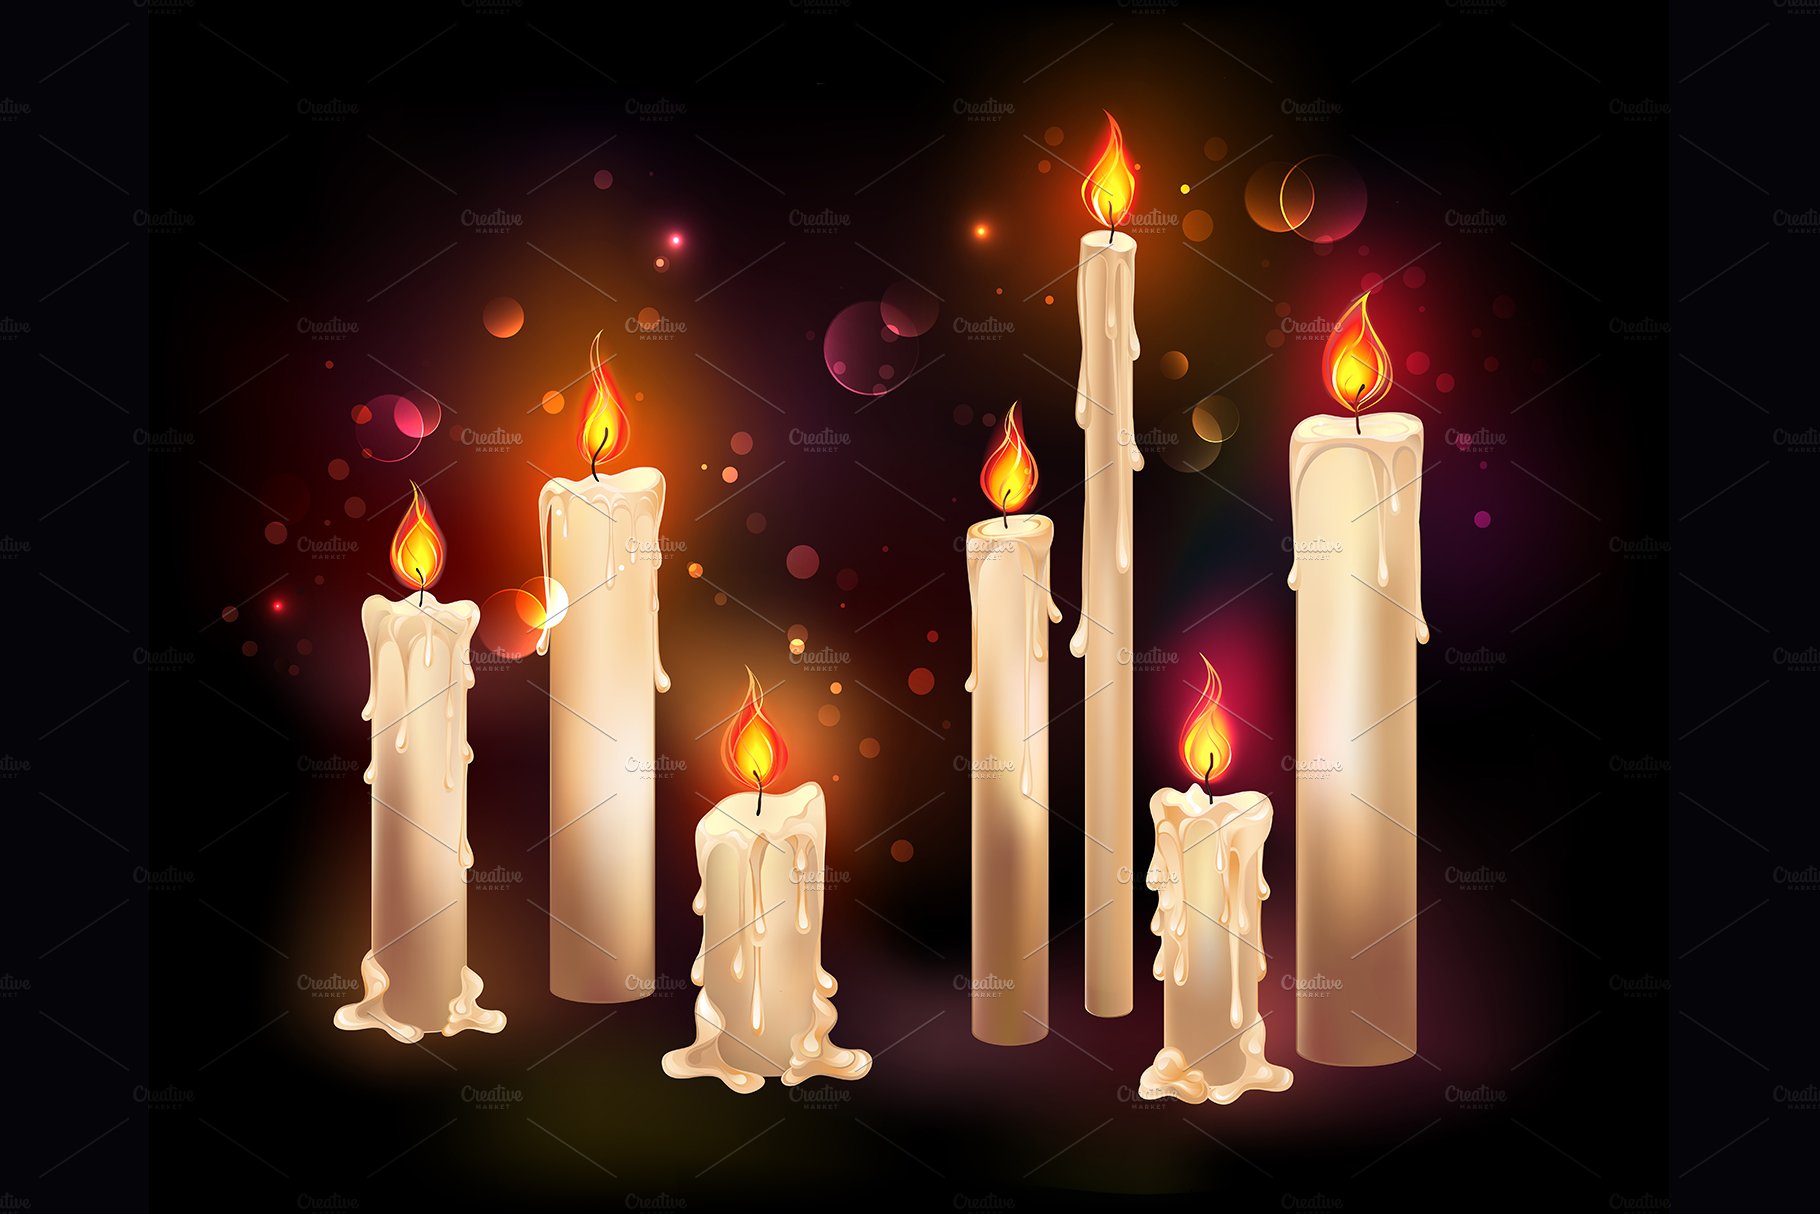 Burning Wax Candles cover image.